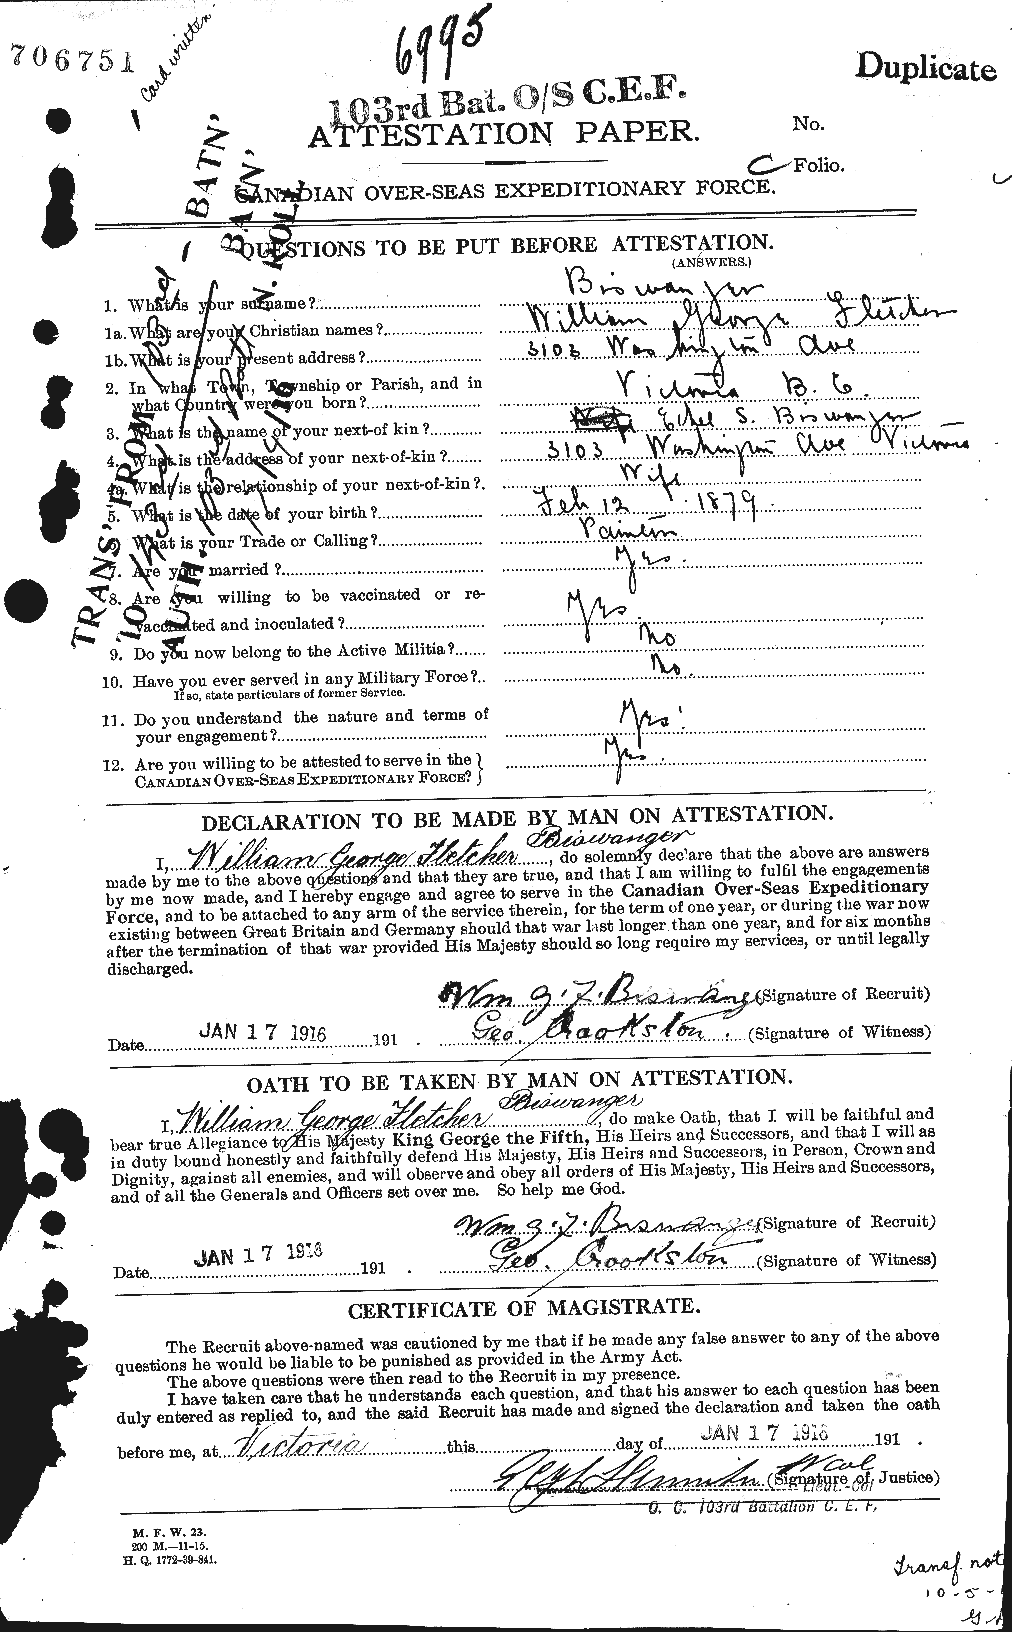 Personnel Records of the First World War - CEF 246240a